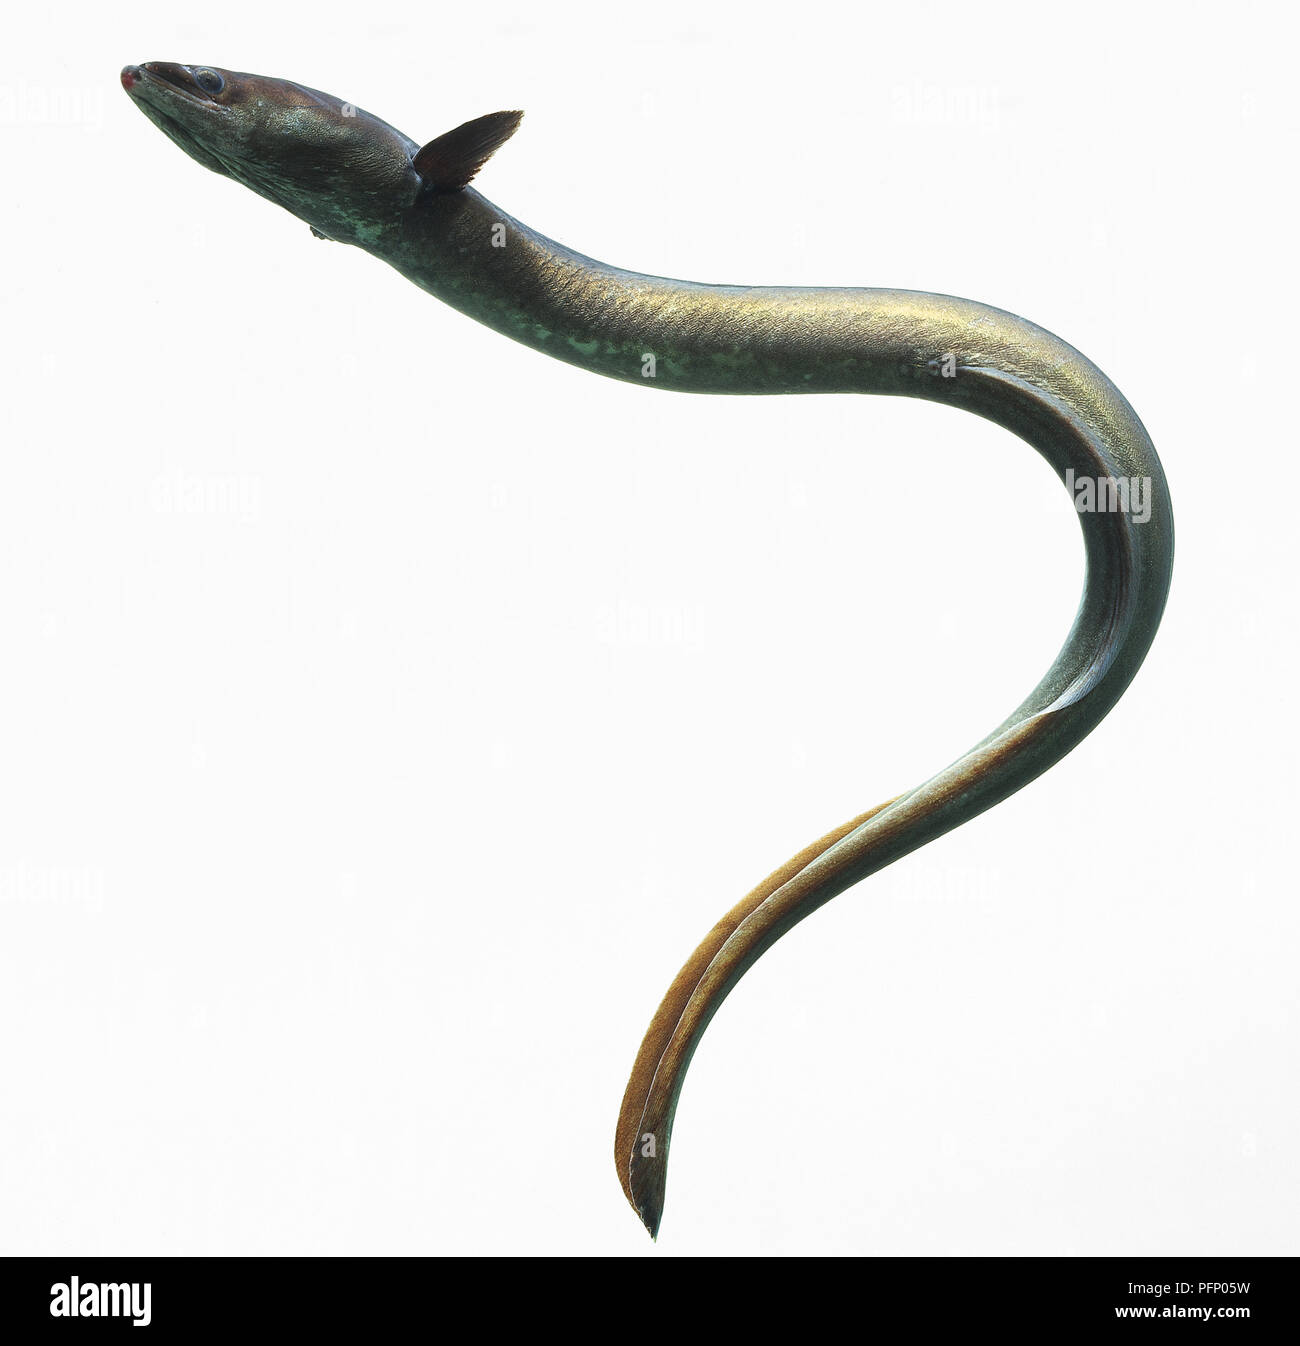 Adult Eel (Anguilliformes) swimming, making curving shape, side view Stock Photo